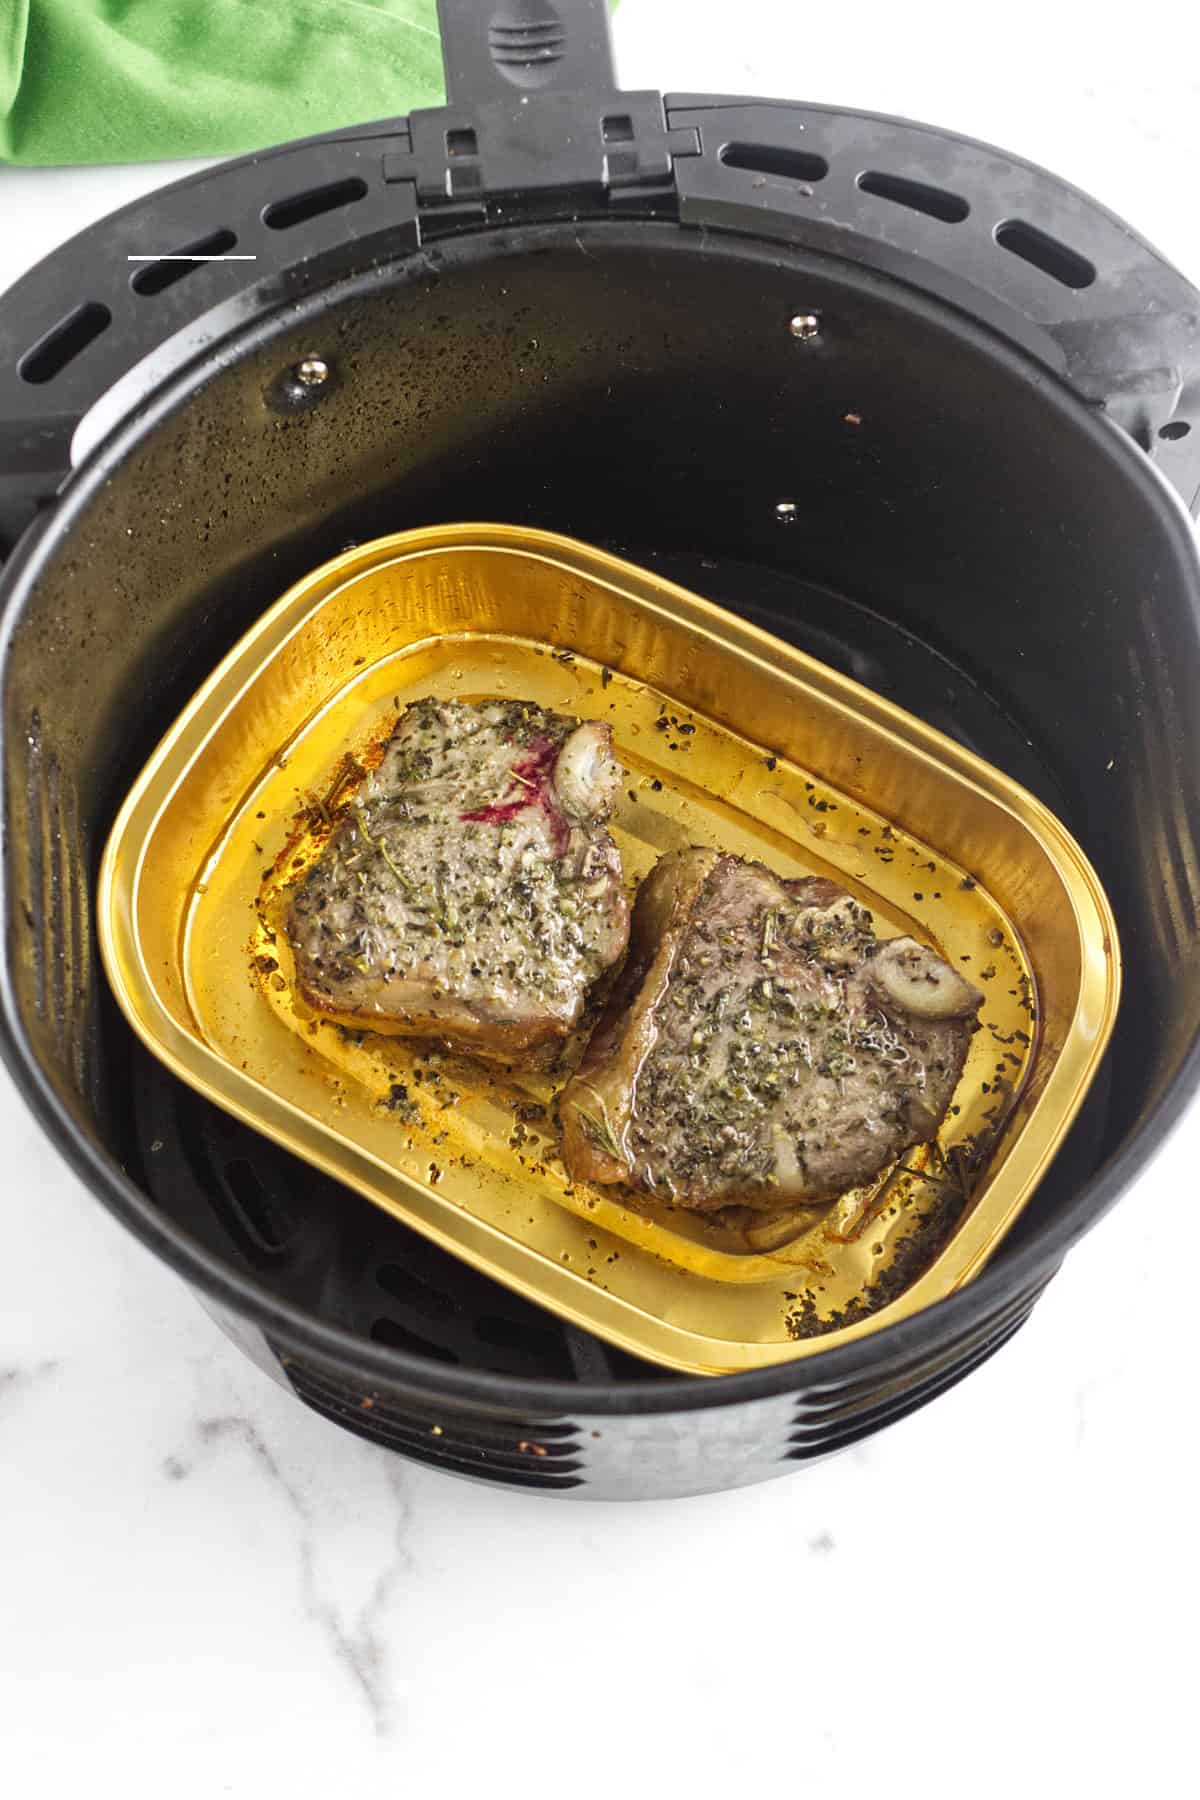 two small steaks cooking in an air fryer.